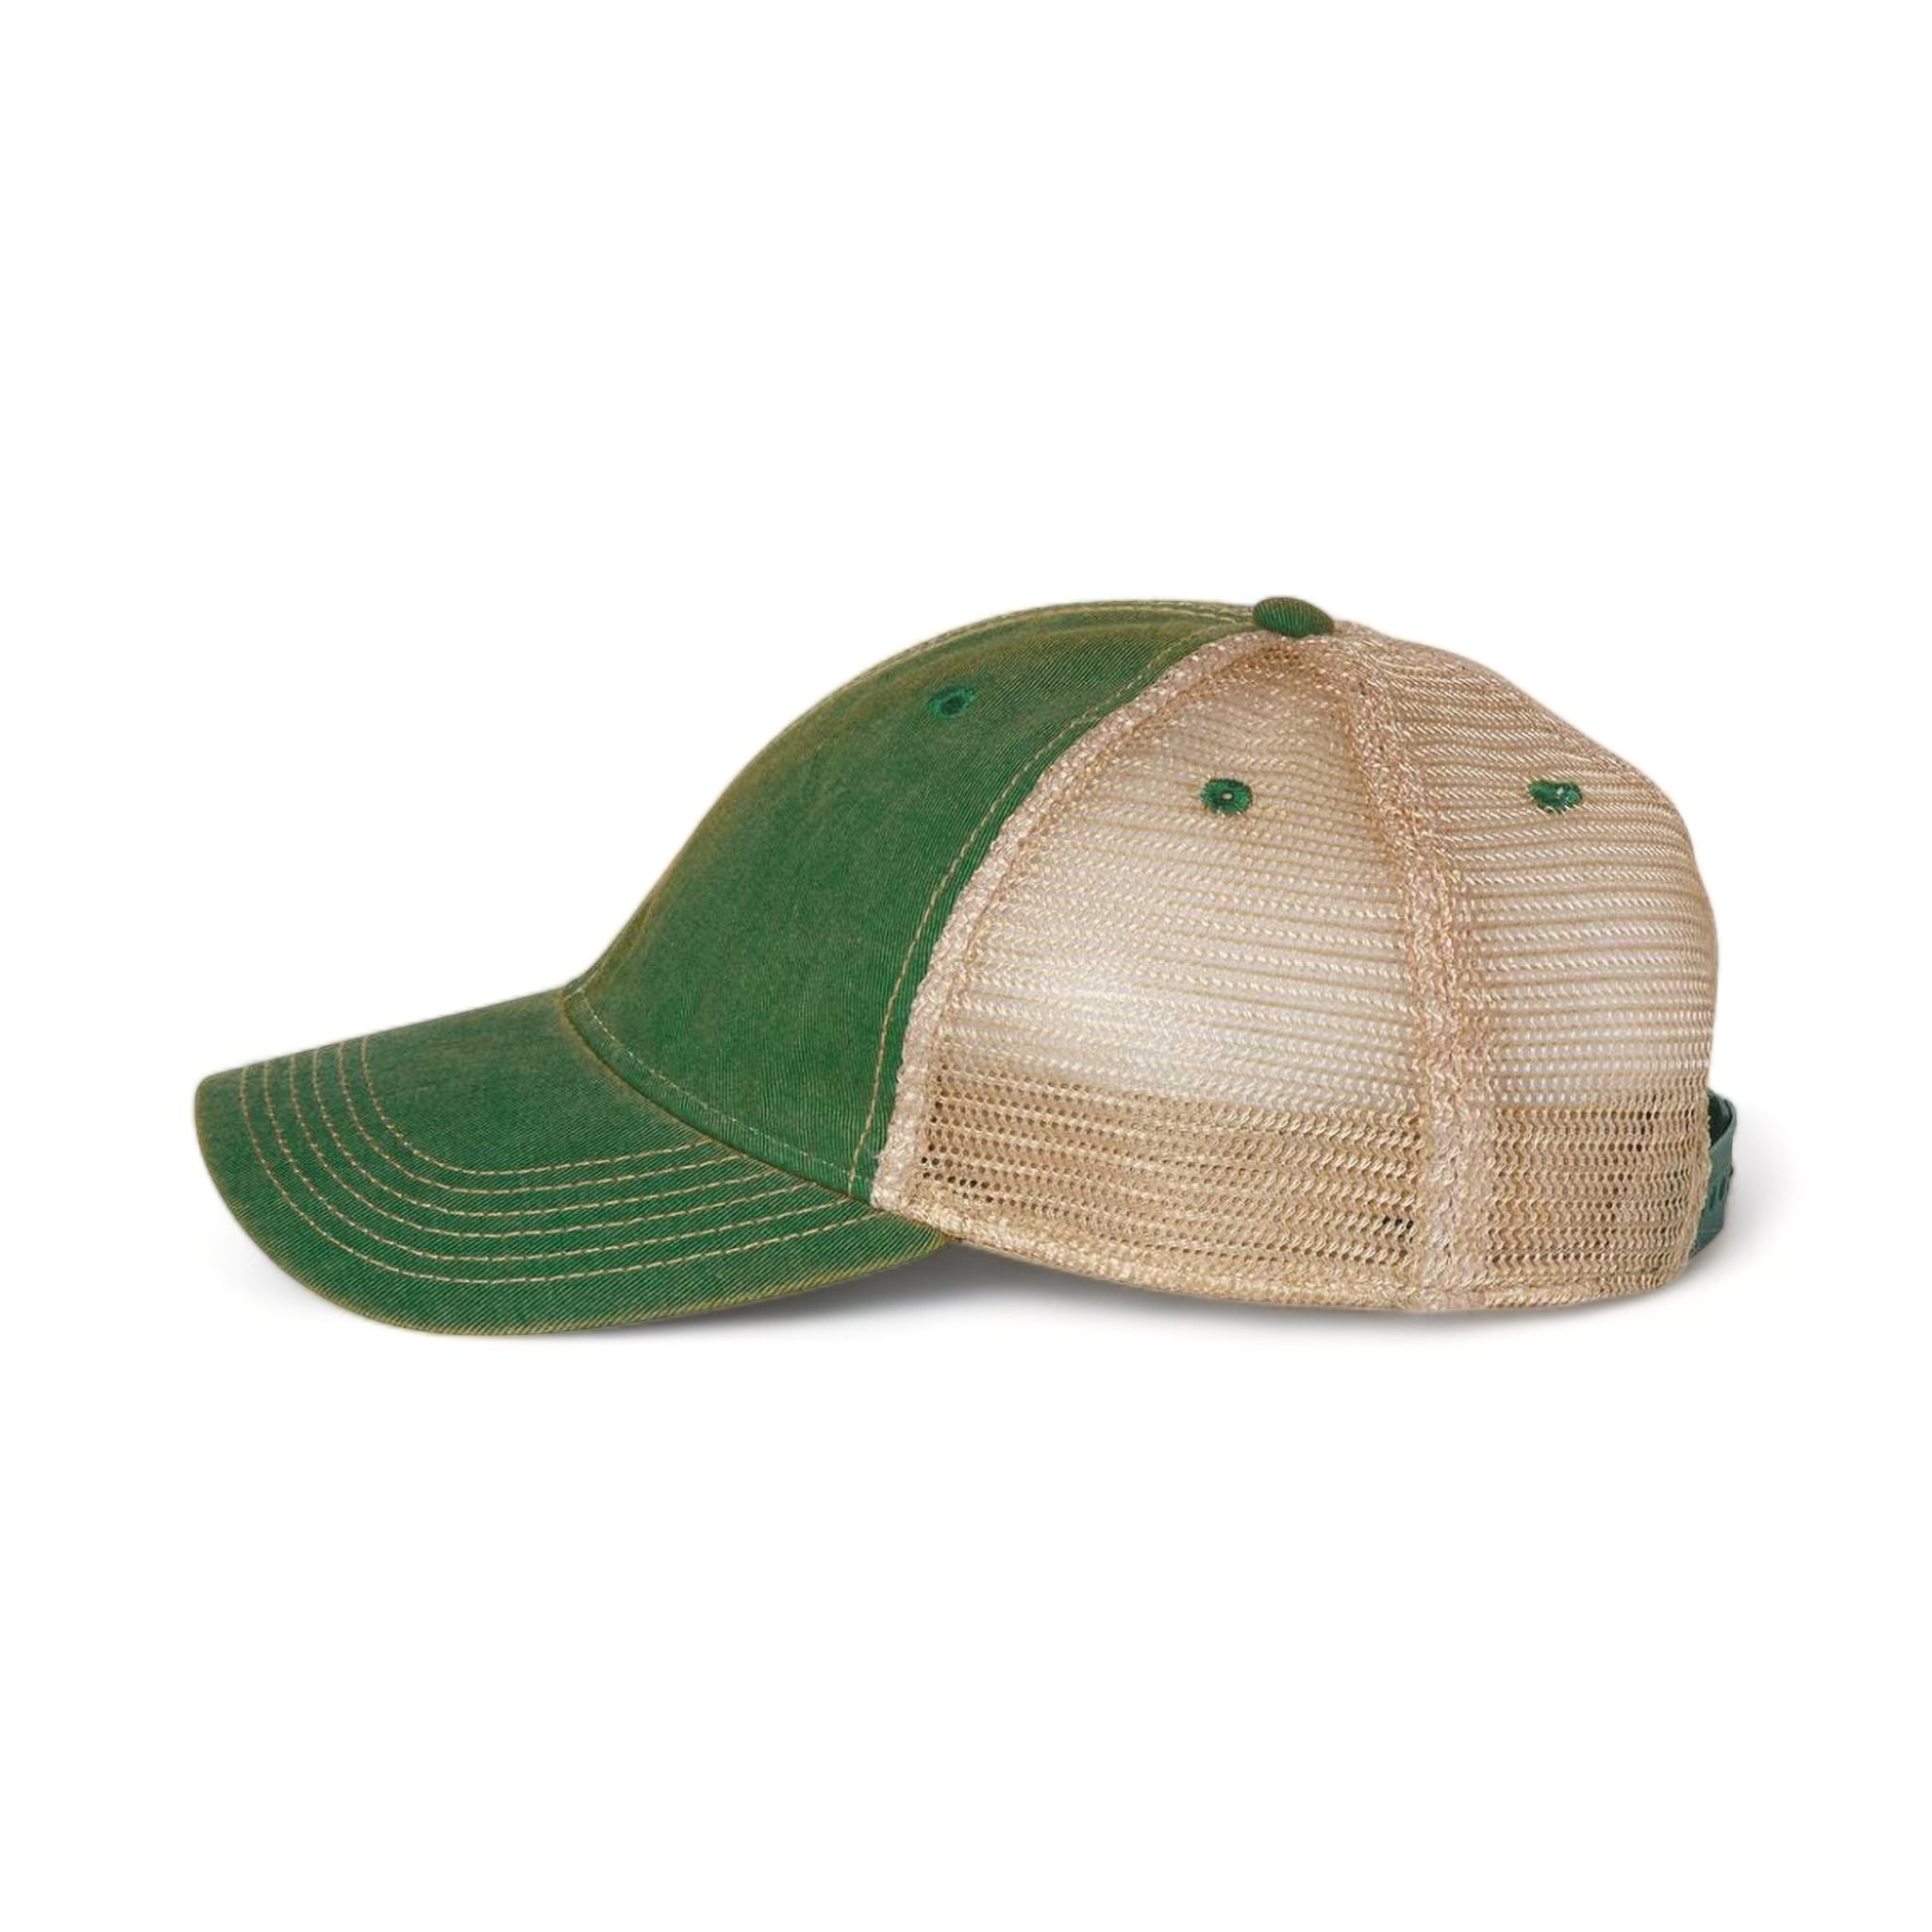 Side view of LEGACY OFA custom hat in kelly green and khaki